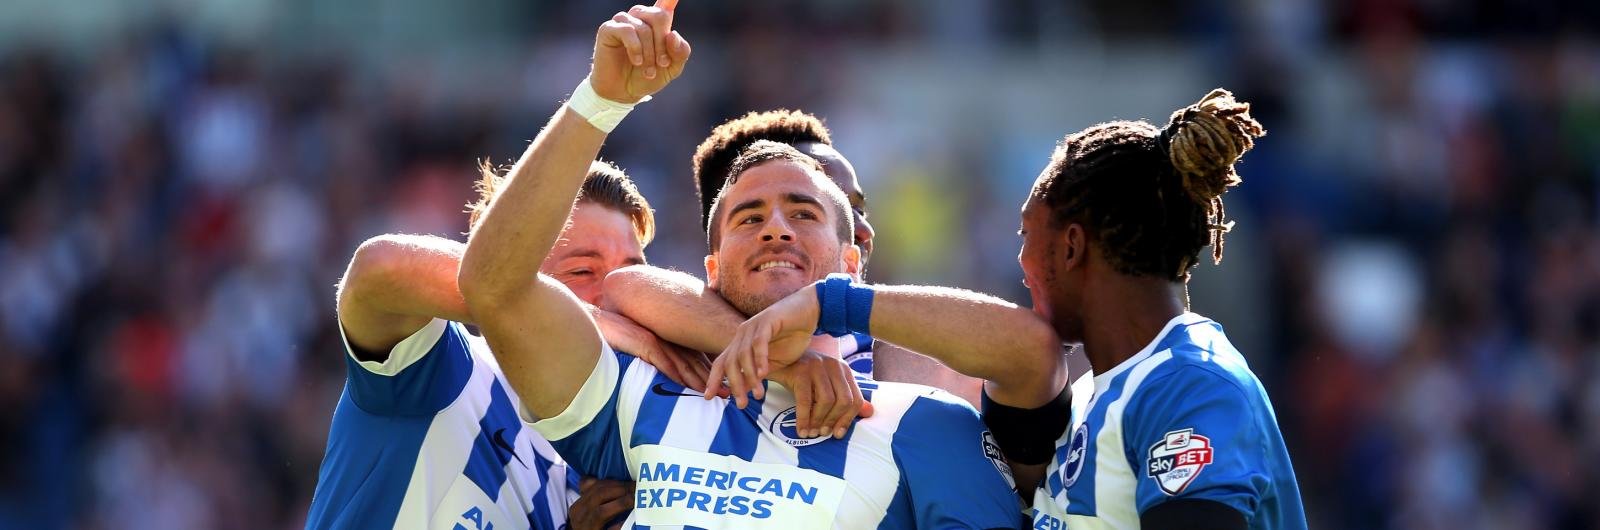 3 reasons why Brighton can gain promotion to the Premier League this season